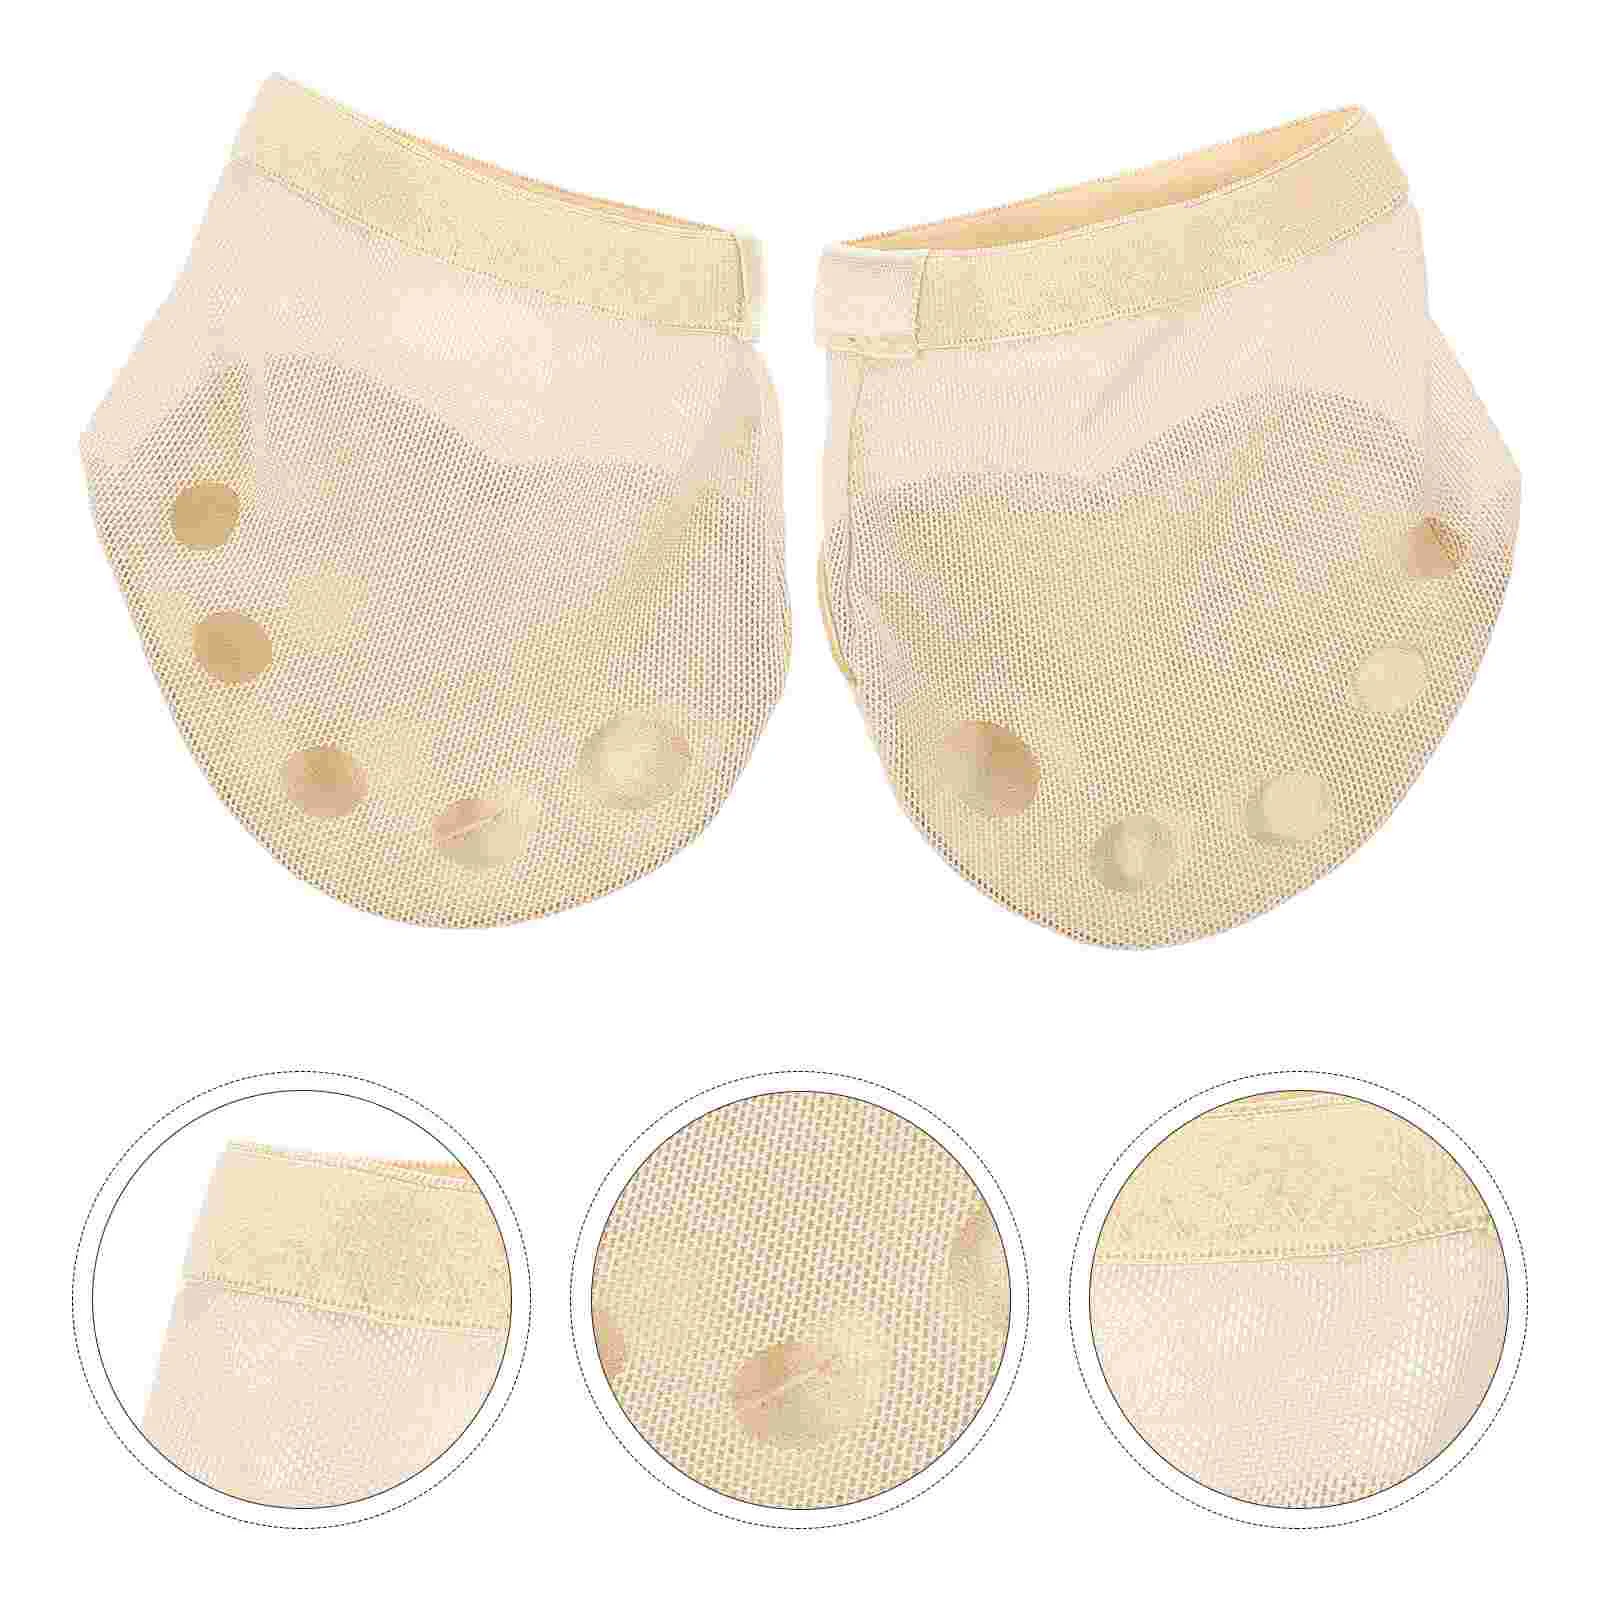 1 Pair Five Holes Half Socks Forefoot Cushion Protective Foot Paw Foot Care Supplies for Ballet Size S